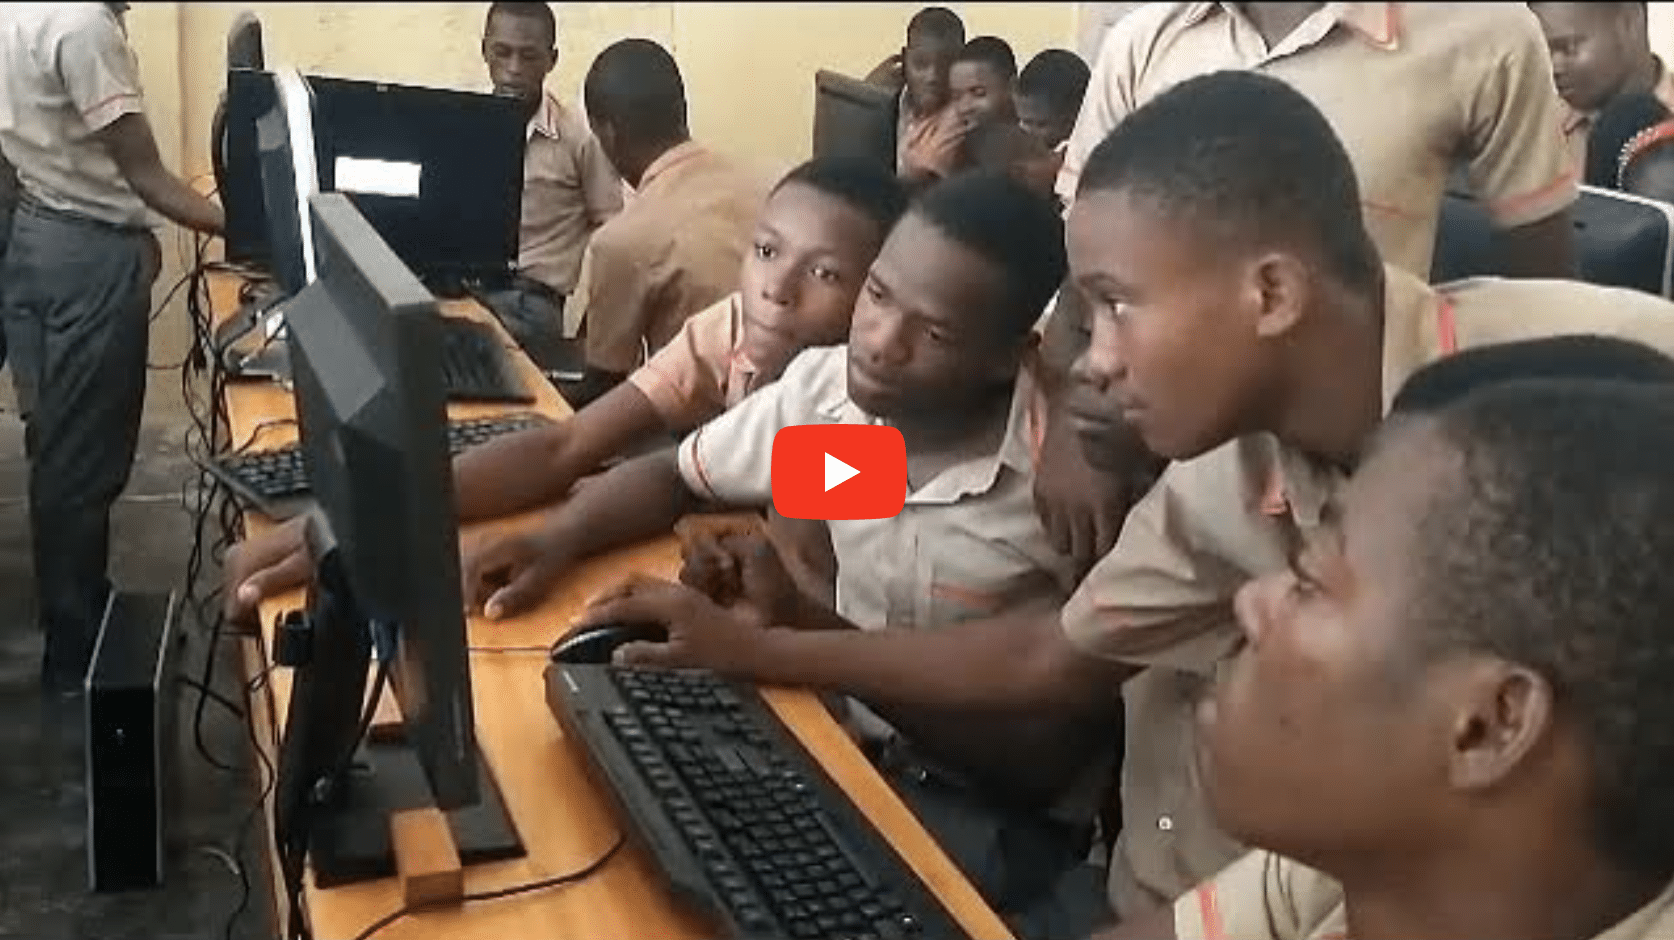 See our Computer Lab in Rural Haiti